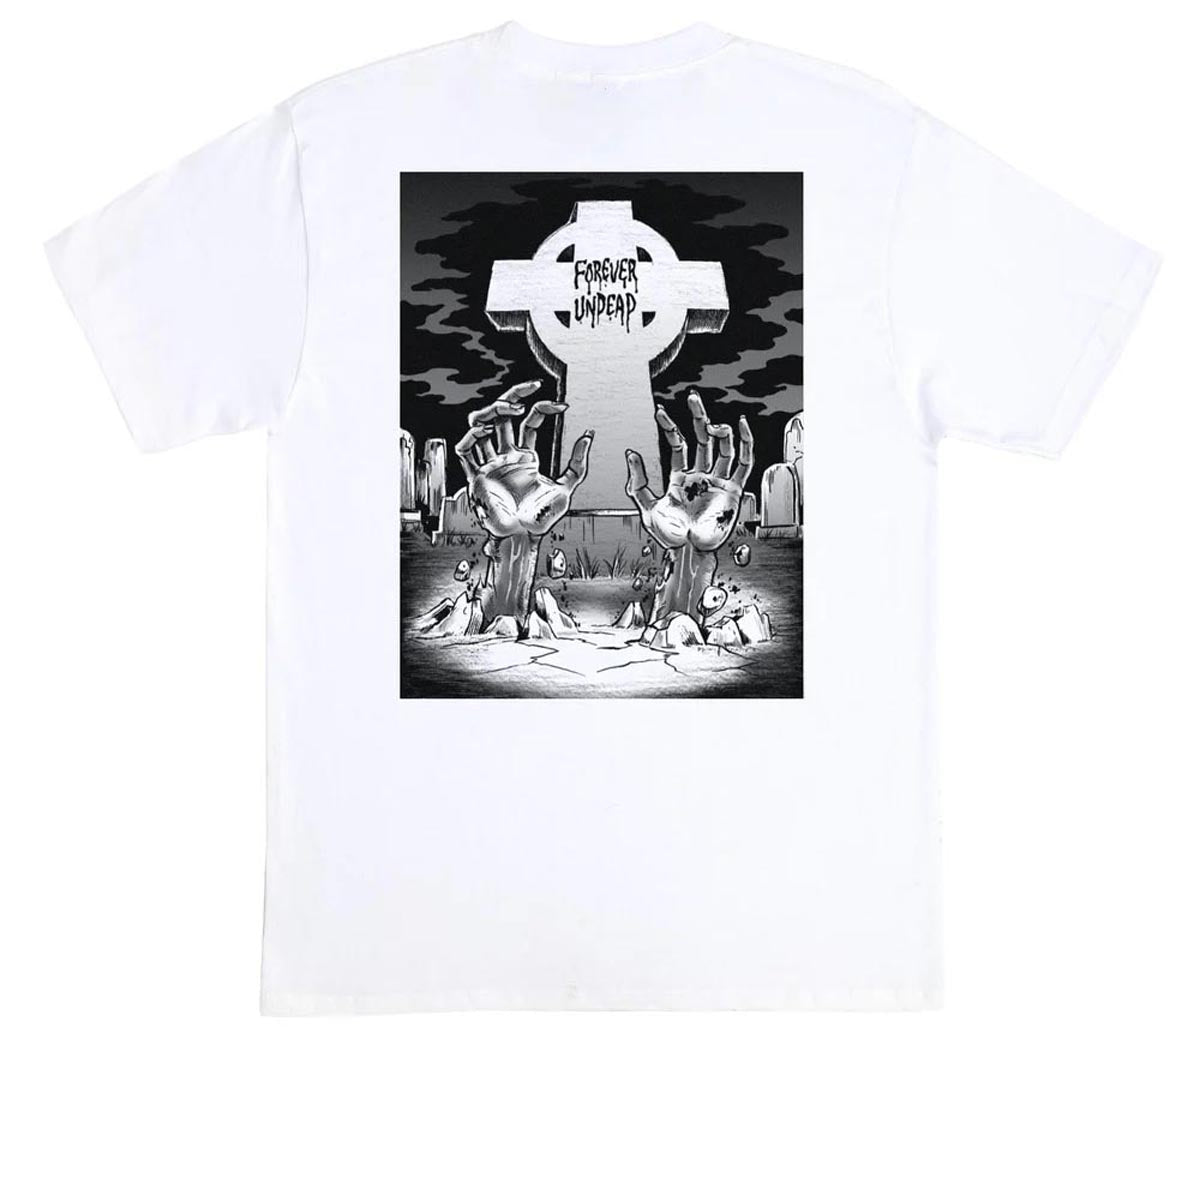 Creature Forever Undead Relic T-Shirt - White image 1